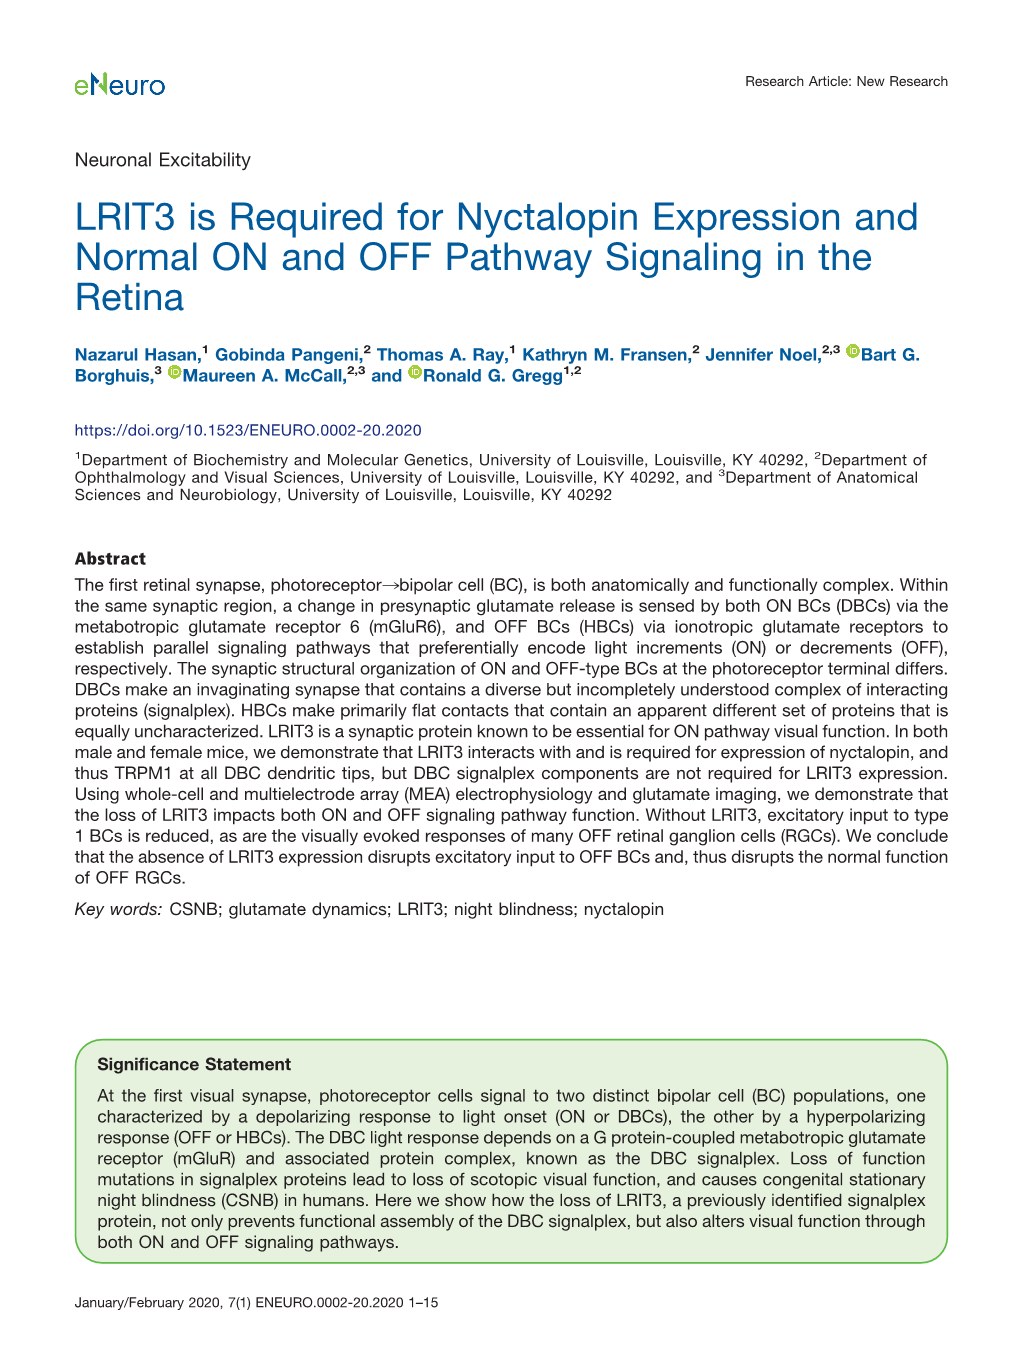 LRIT3 Is Required for Nyctalopin Expression and Normal on and OFF Pathway Signaling in the Retina